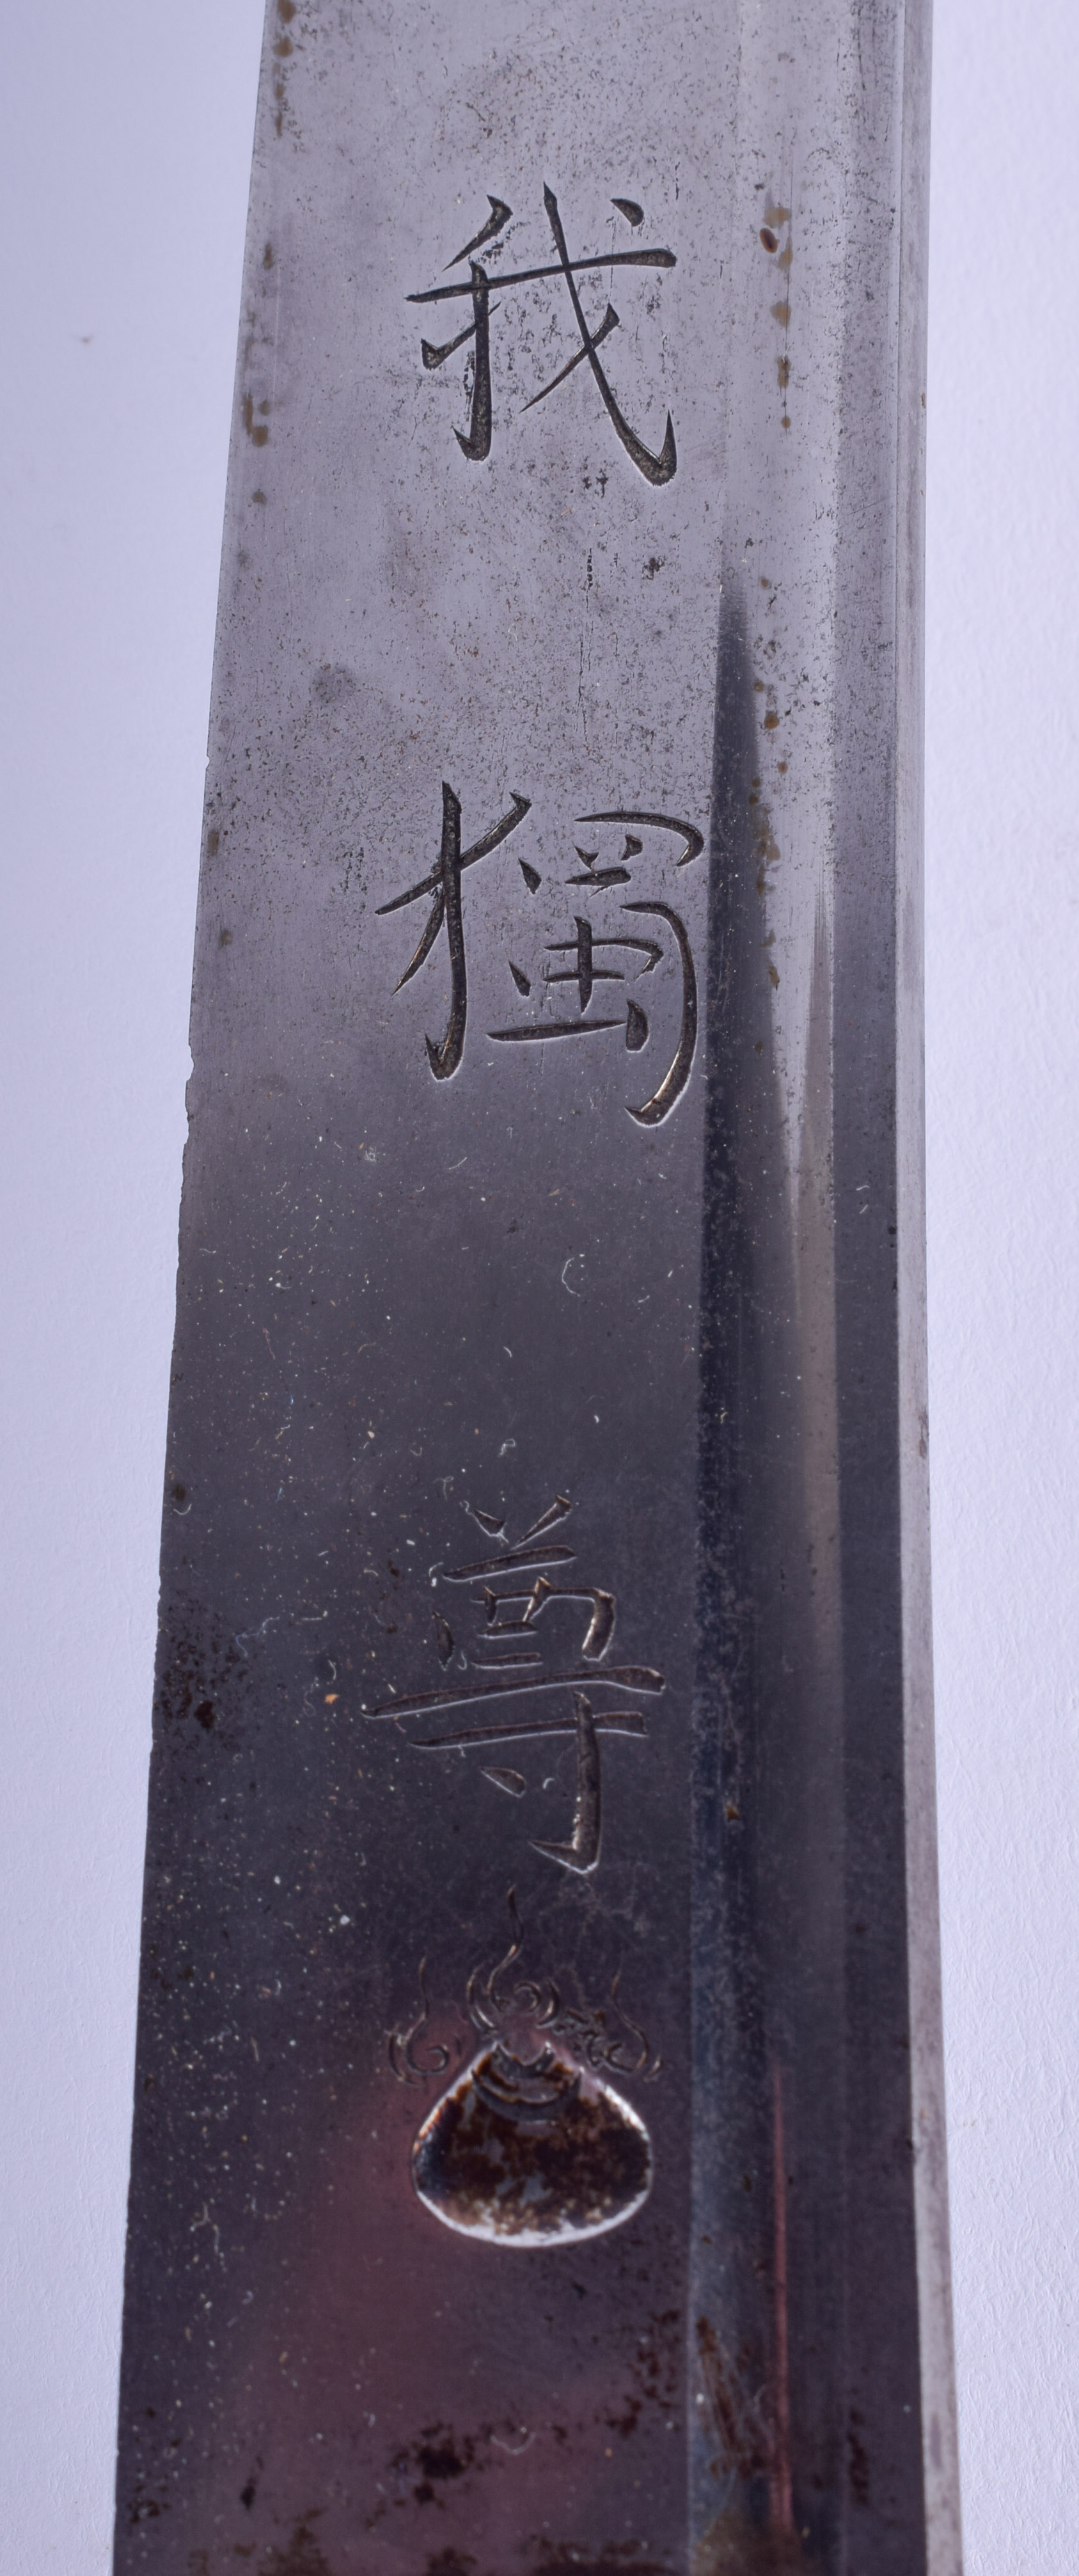 A FINE 19TH CENTURY JAPANESE MEIJI PERIOD BRONZE SAMURAI SWORD with ray skin handle and gold inlaid - Image 3 of 24